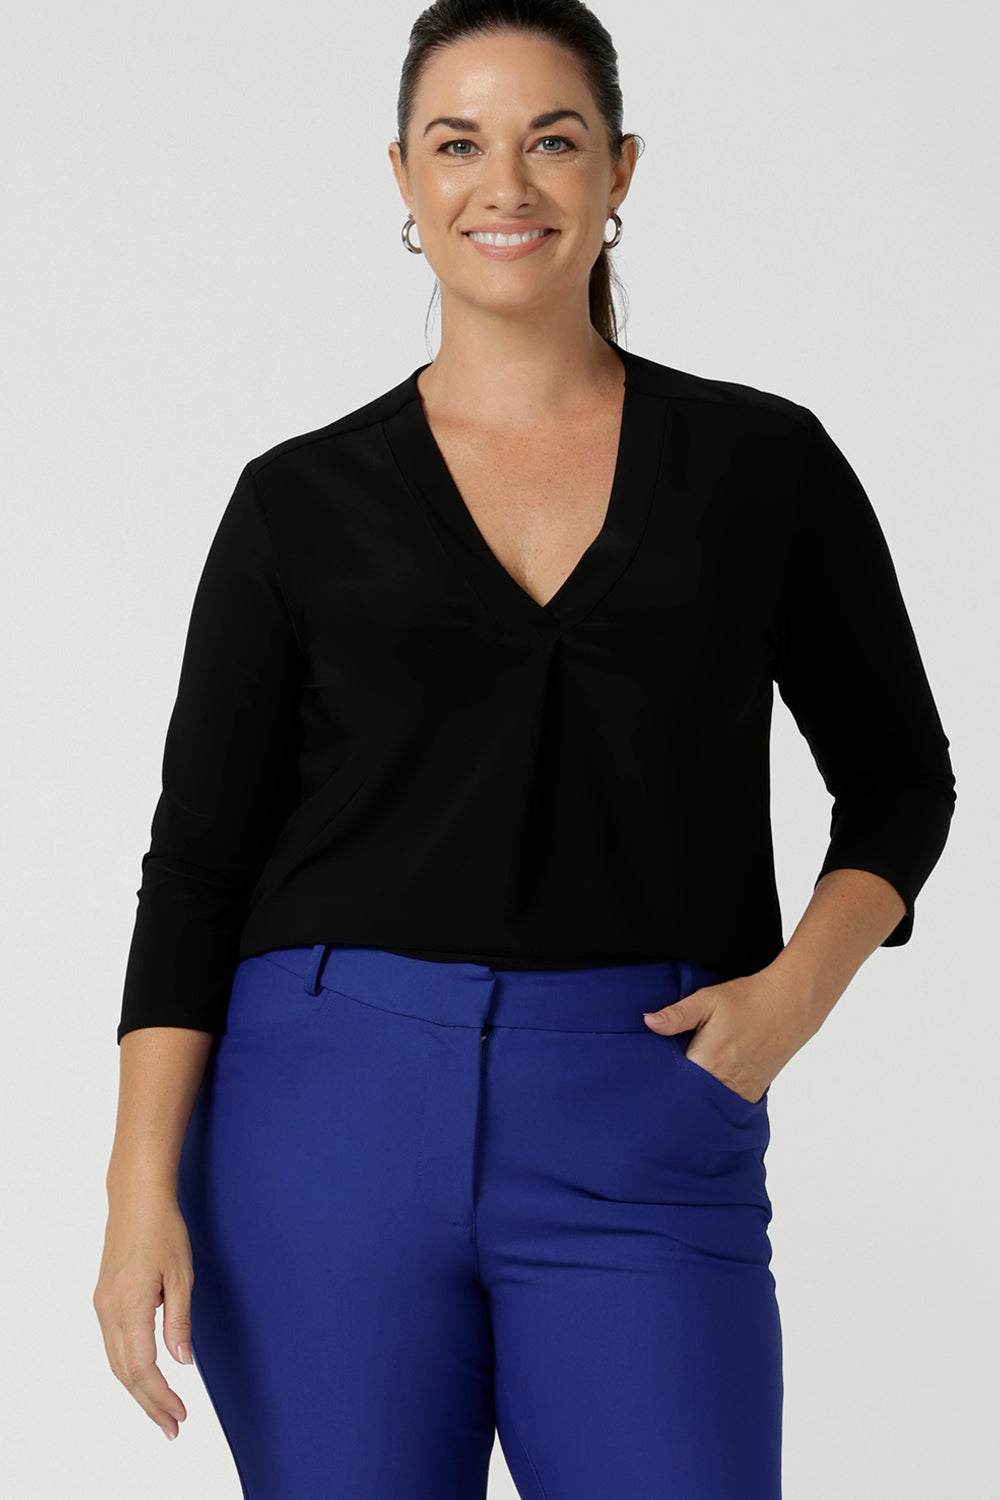 Size 12 woman wears comfortable corporate work top in black jersey. The Jaime top is Australian made with a tailored pleat front neckline, v-neckline and 3/4 sleeve. Sizes 8 - 24